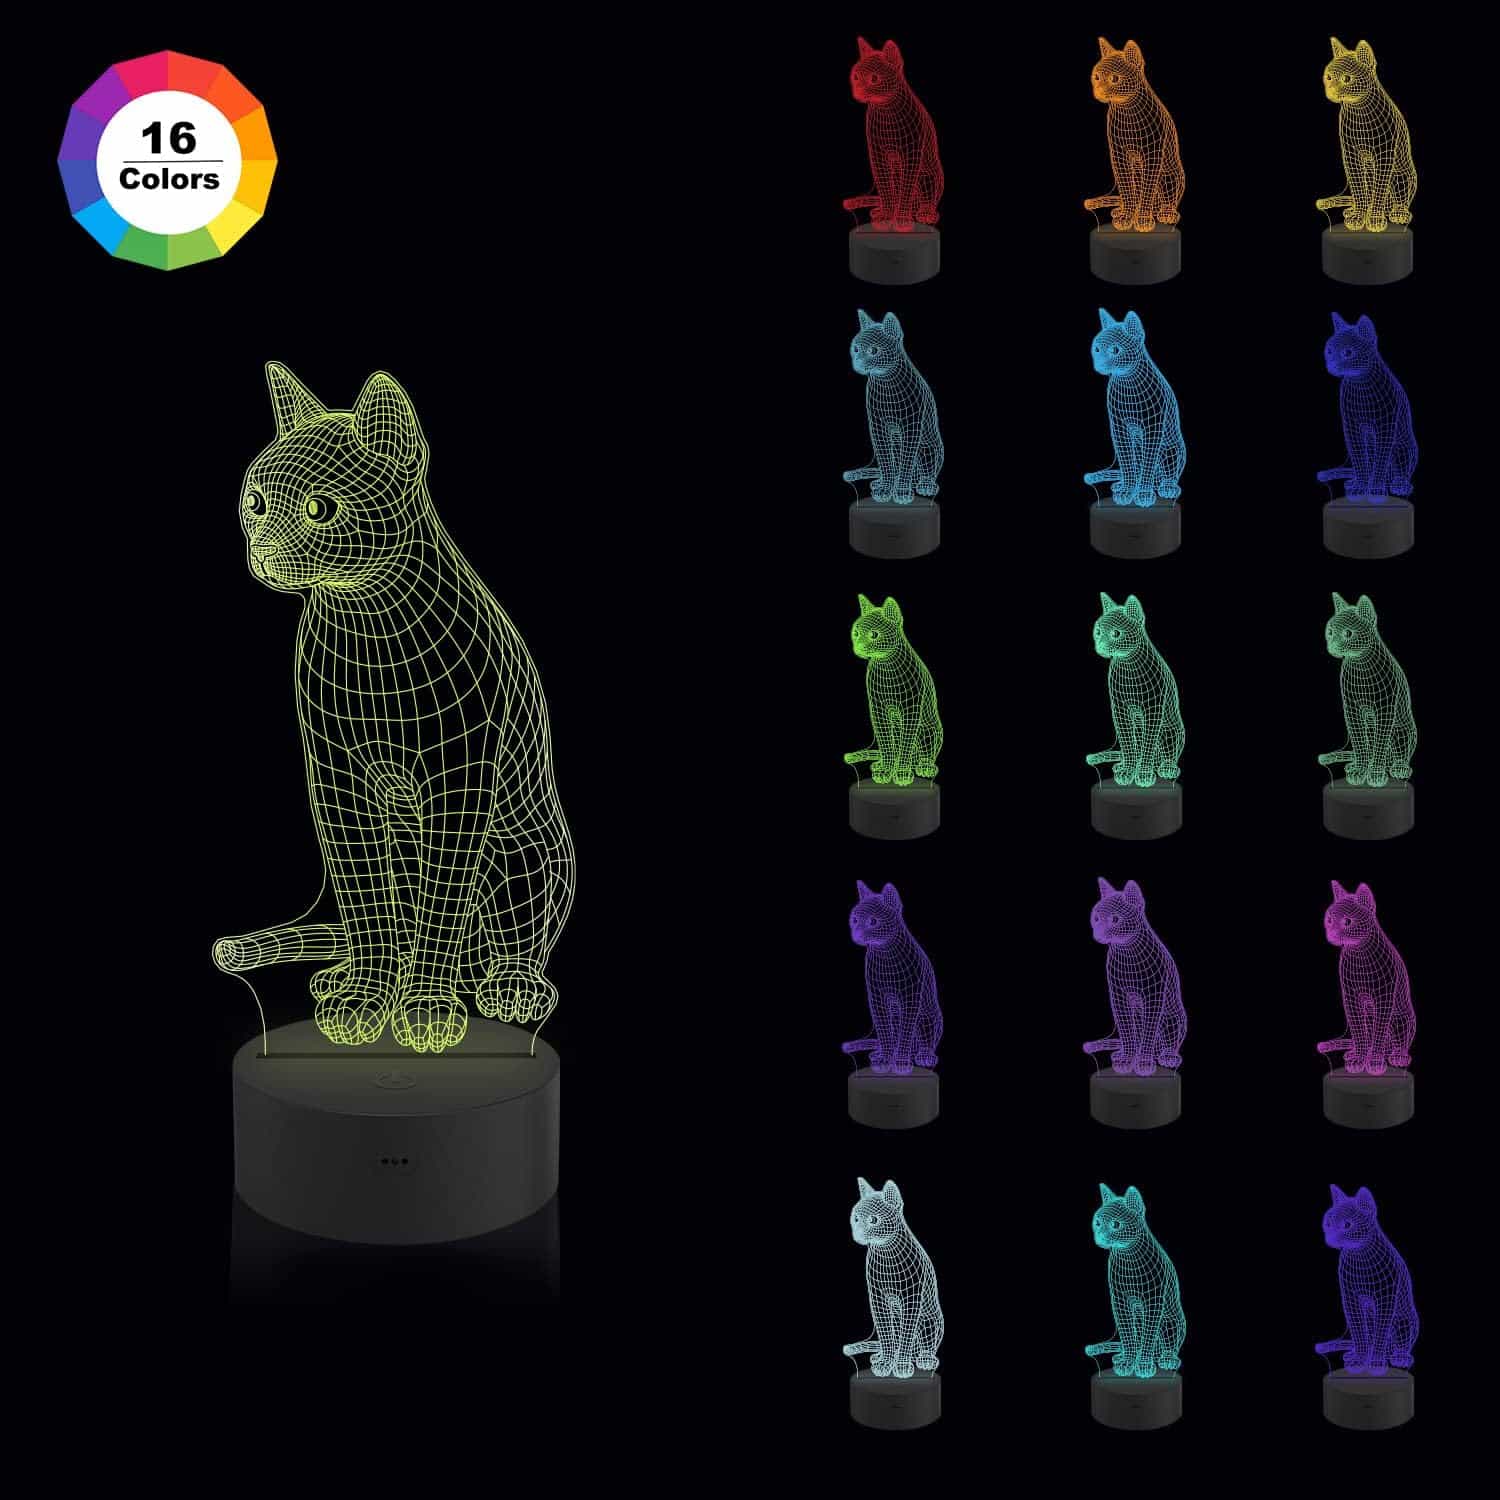 Cat 3D Bedside Light for Kids, Kitty Illusion Night Lamp 4662